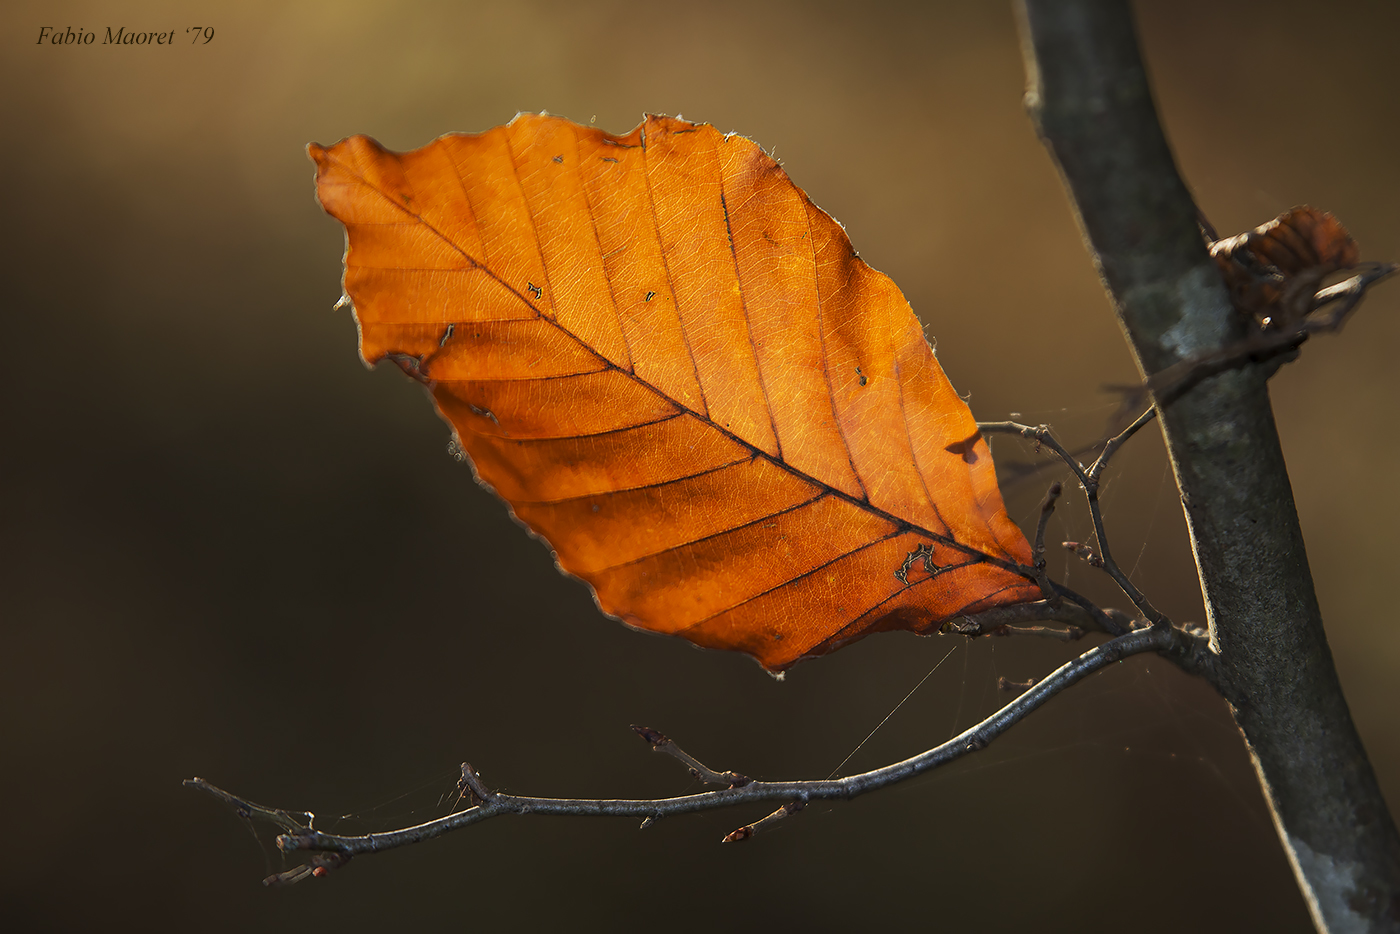 A Late Autumn..... But This Leaf Resists.........